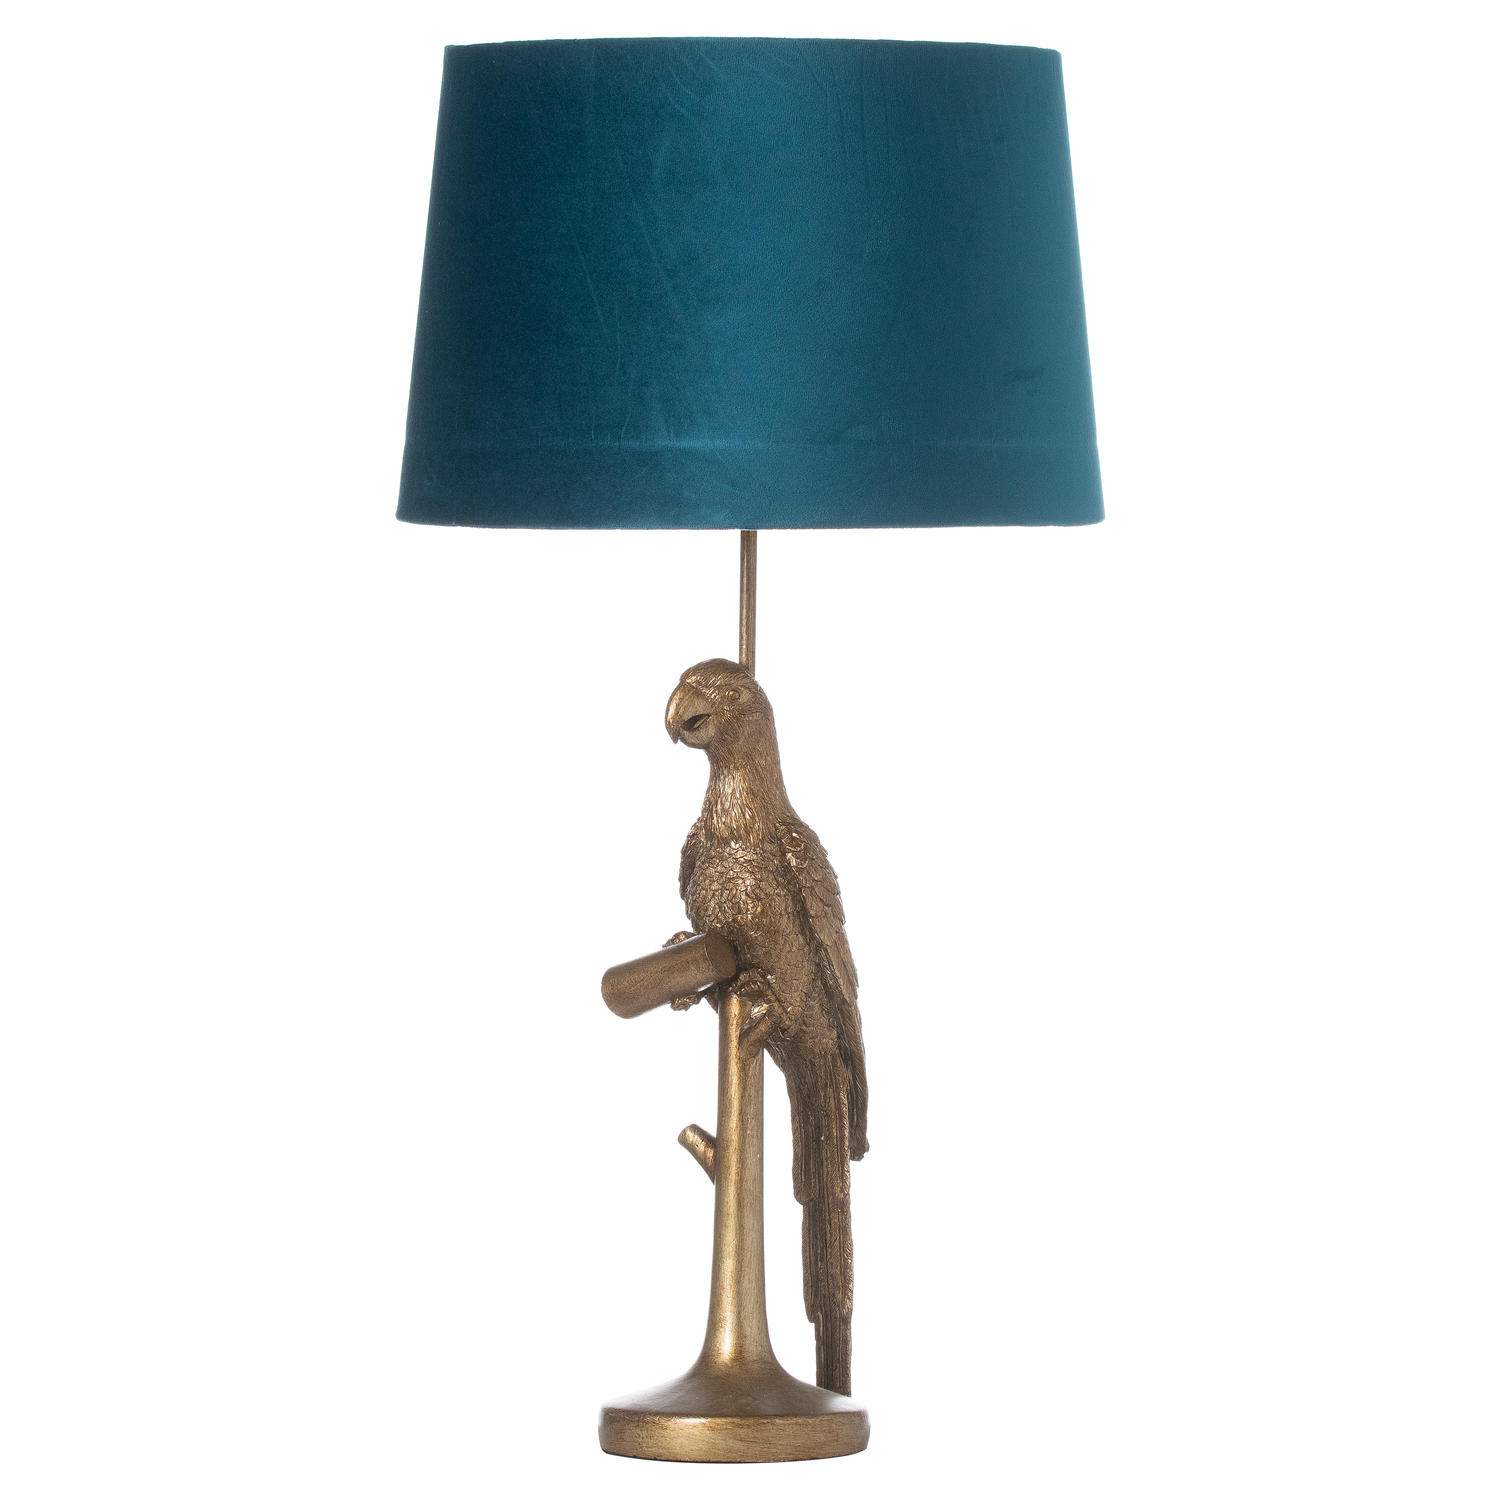 Percy The Parrot Gold Table Lamp With Teal Velvet Shade - Image 1